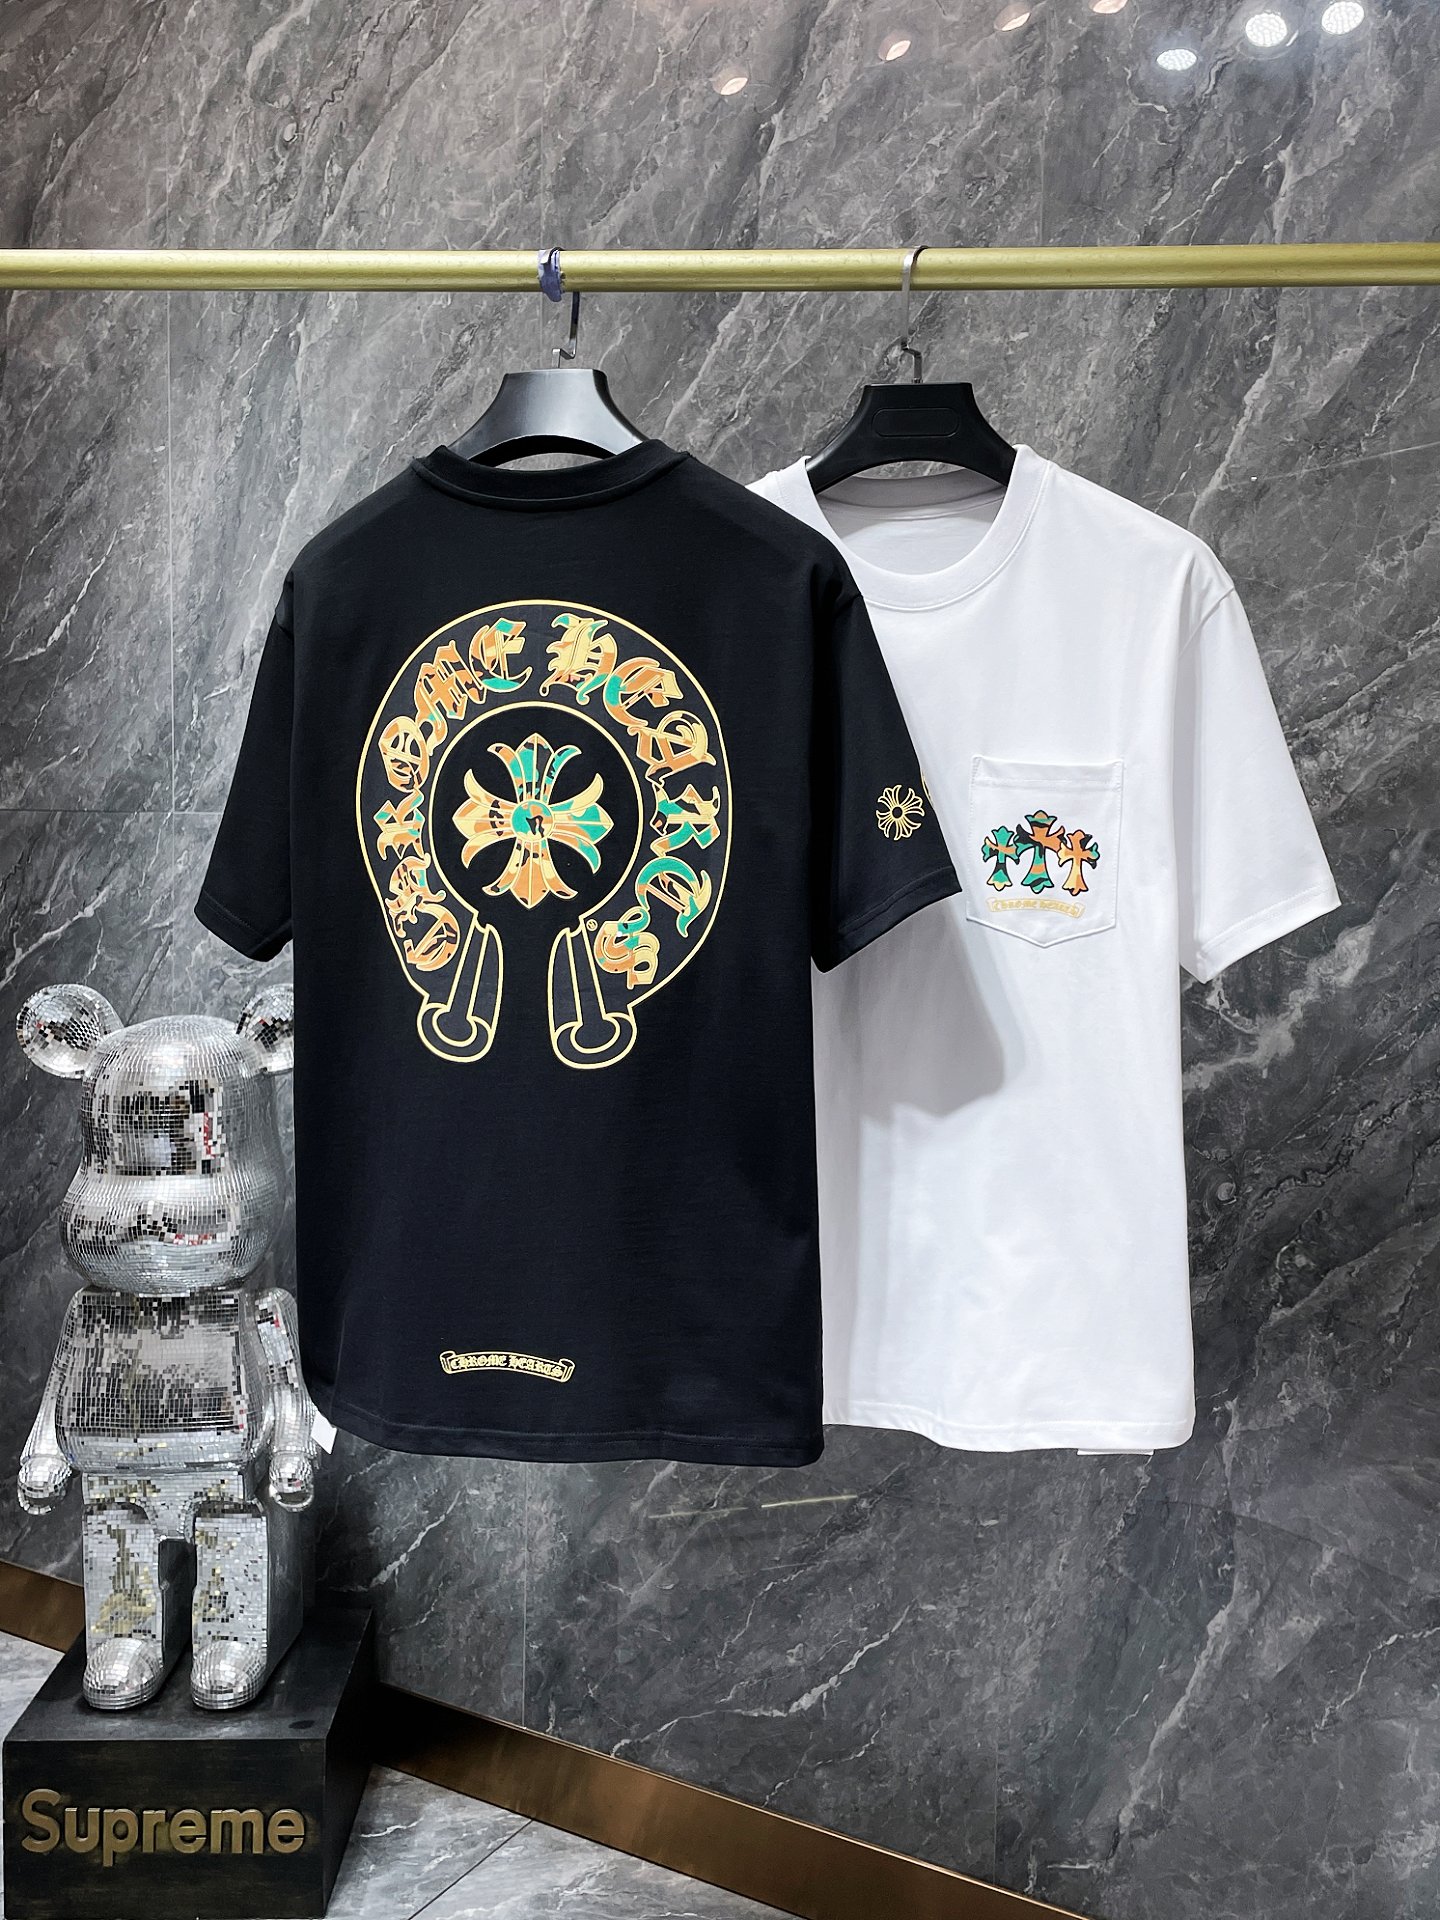 Luxury 7 Star Replica
 Chrome Hearts Clothing T-Shirt Black White Printing Summer Collection Short Sleeve